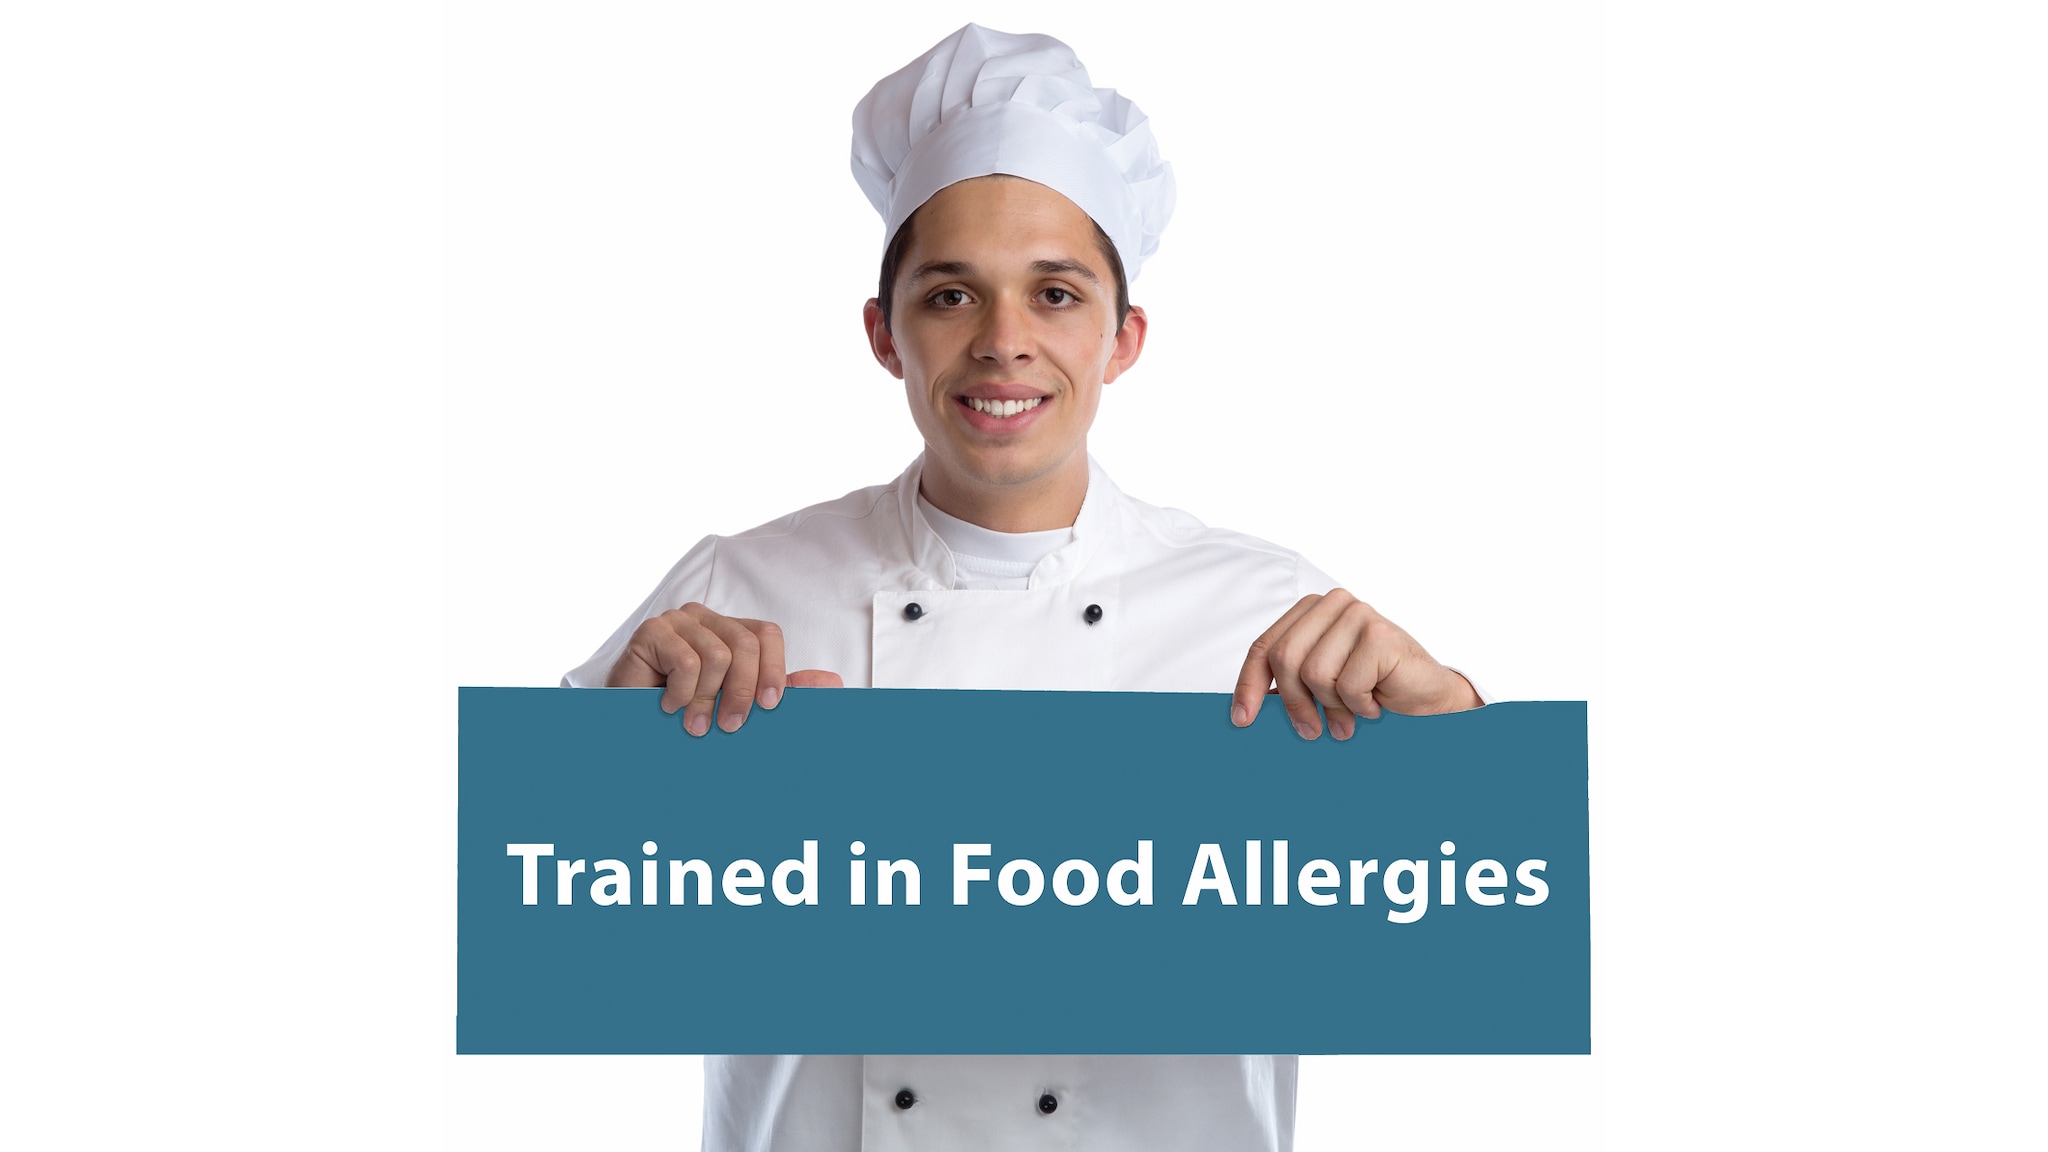 Food worker holding a sign that says "Trained in Food Allergies"